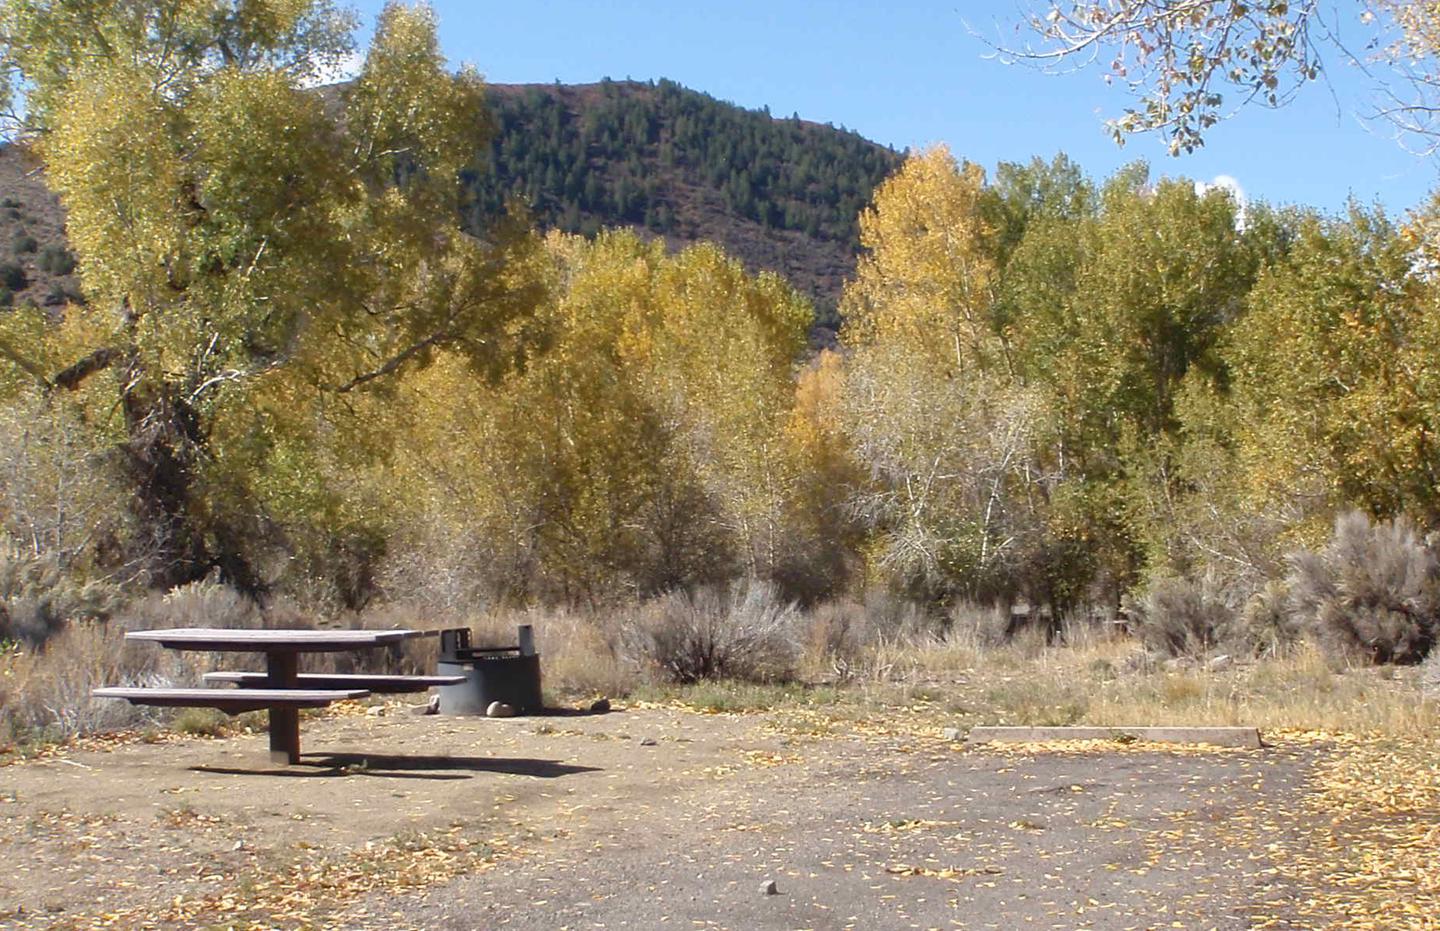 Campsite 3: driveway, picnic table, and firepit. Set in sagebrush and trees.